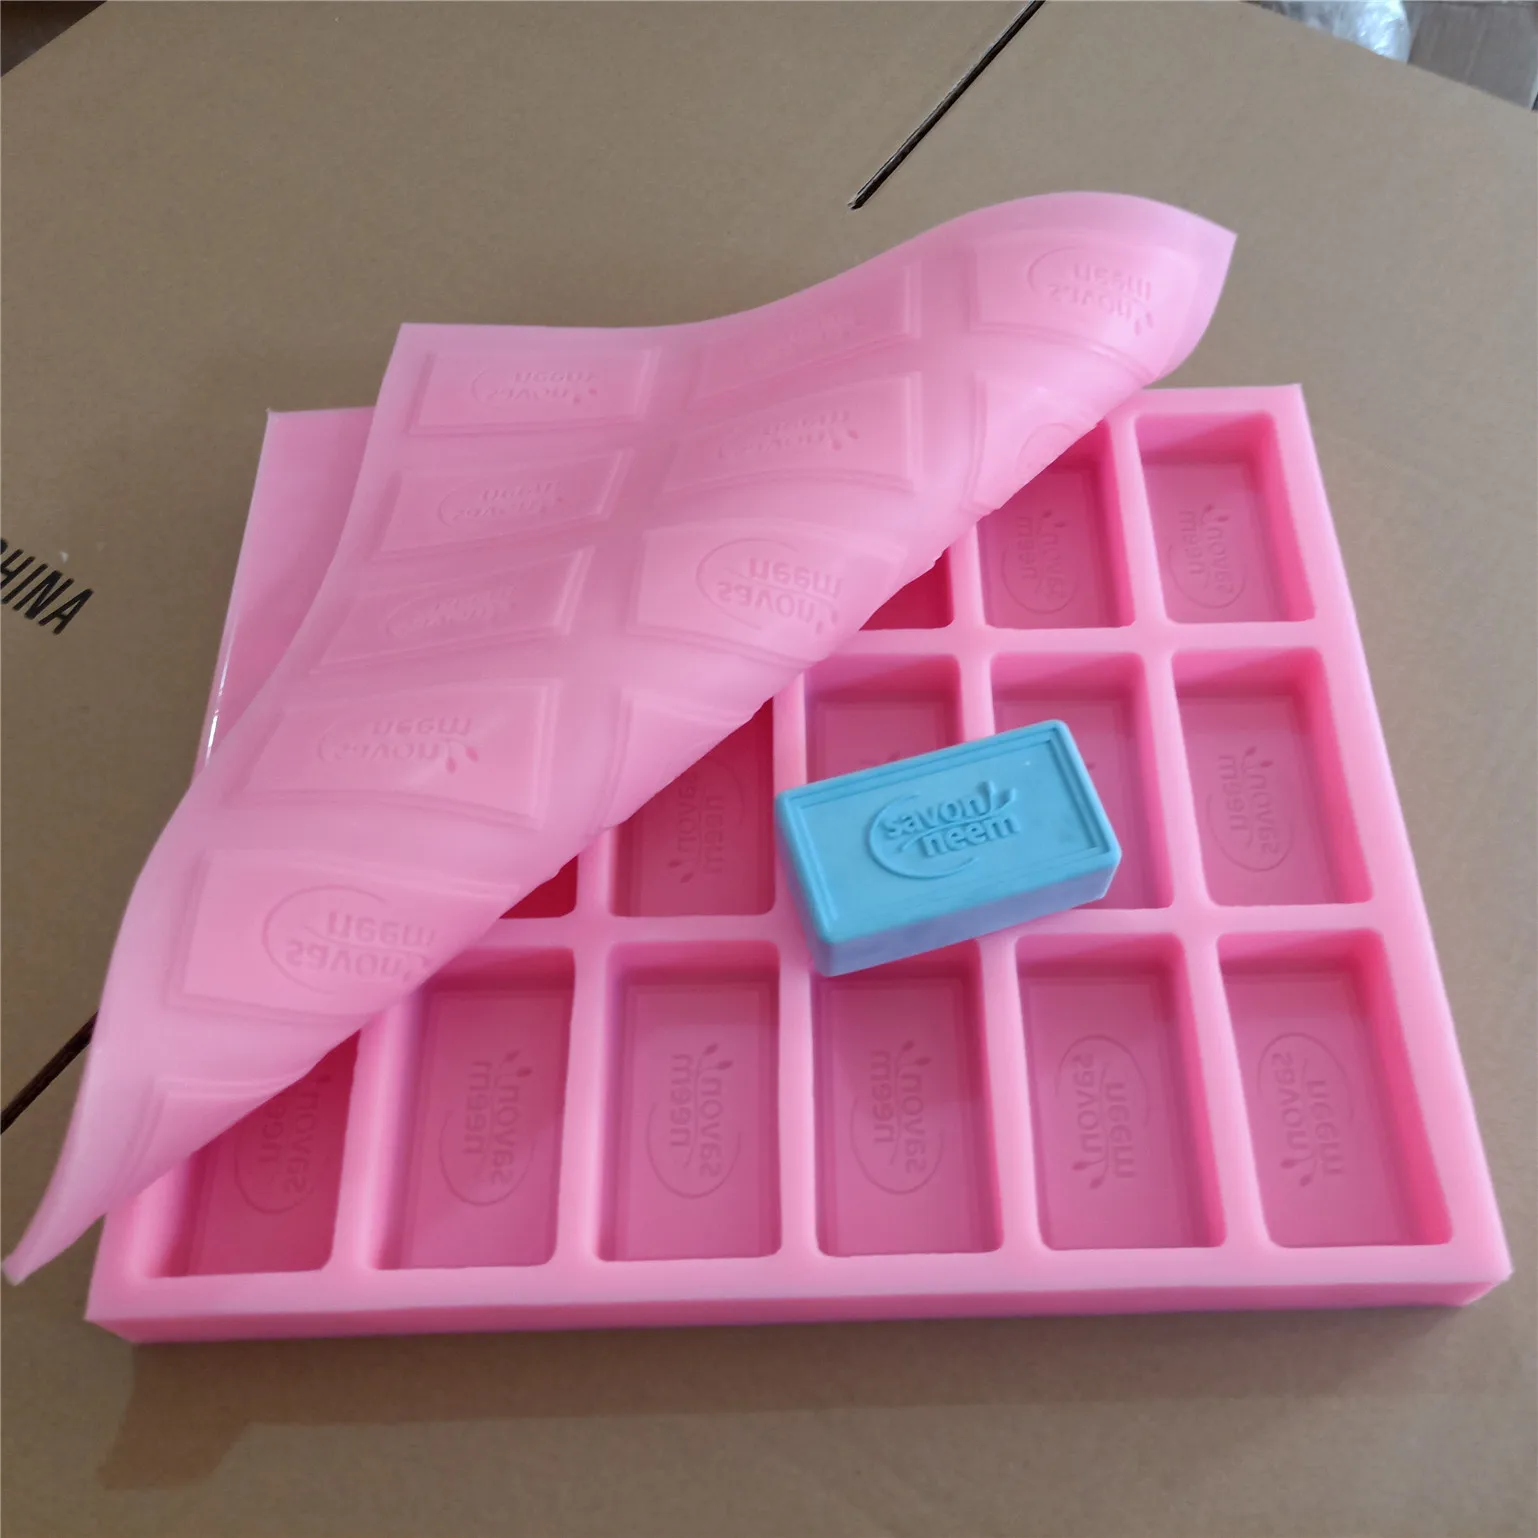 16 Cavities Custom Bar Soap Mold Mould Customize Silicone Mold for